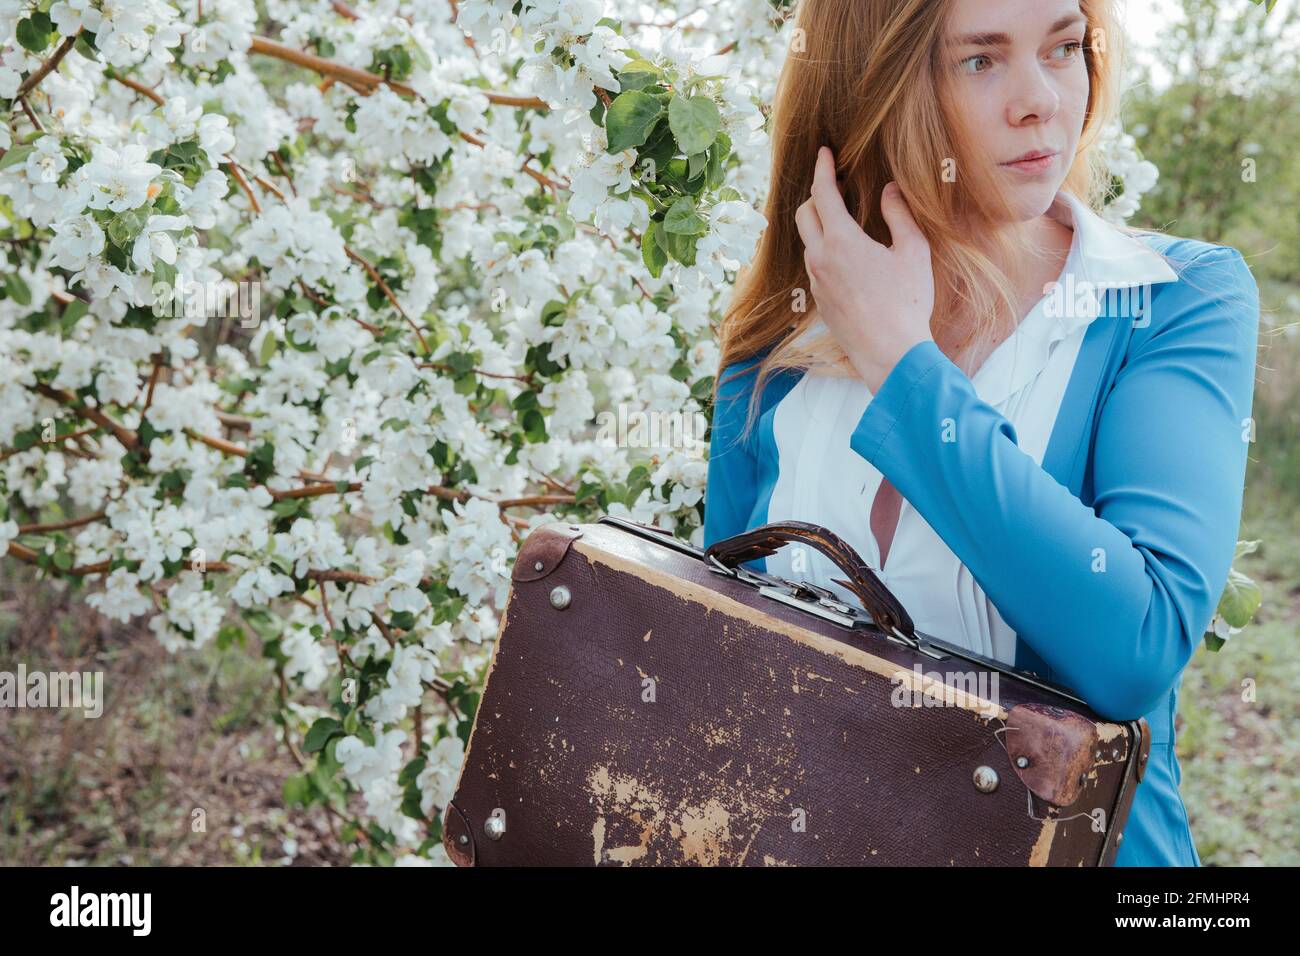 A young woman holds an old suitcase in her hands.  Stock Photo